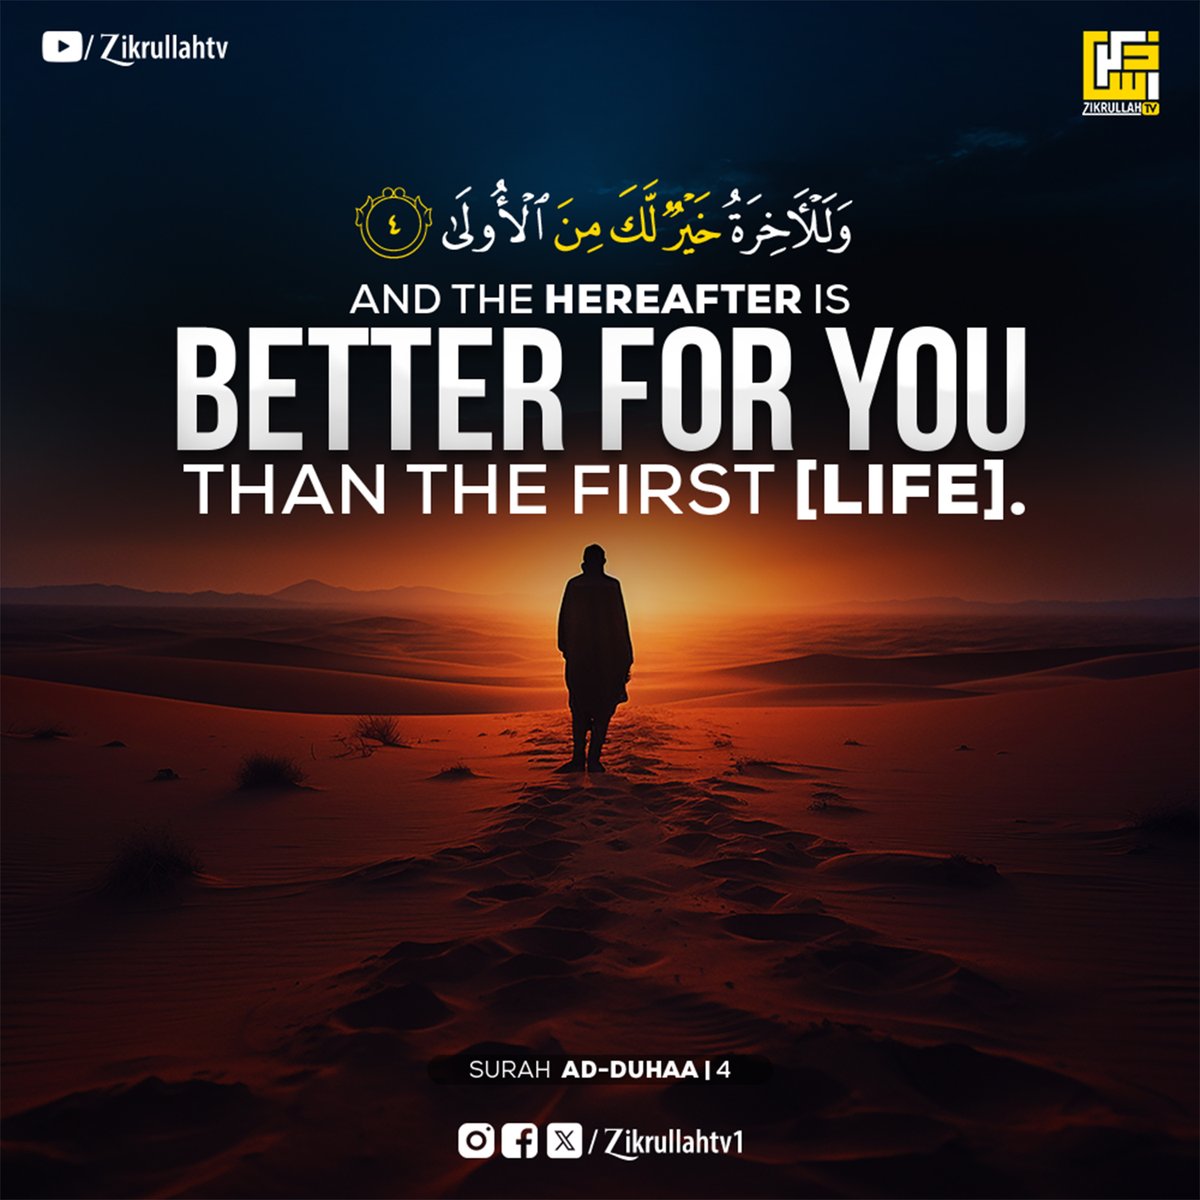 And the Hereafter is better for you than the first [life].(Al-Quran 93:4)
Watch Surah Surah Ad-Duha : youtu.be/-iHwJS6pYAI

#quran #quranquote #quranmajeed #quranverses #quranquotes #QuranChallenge #quranrecitation #QuranTogetherChallenge #quranletteringchallenge